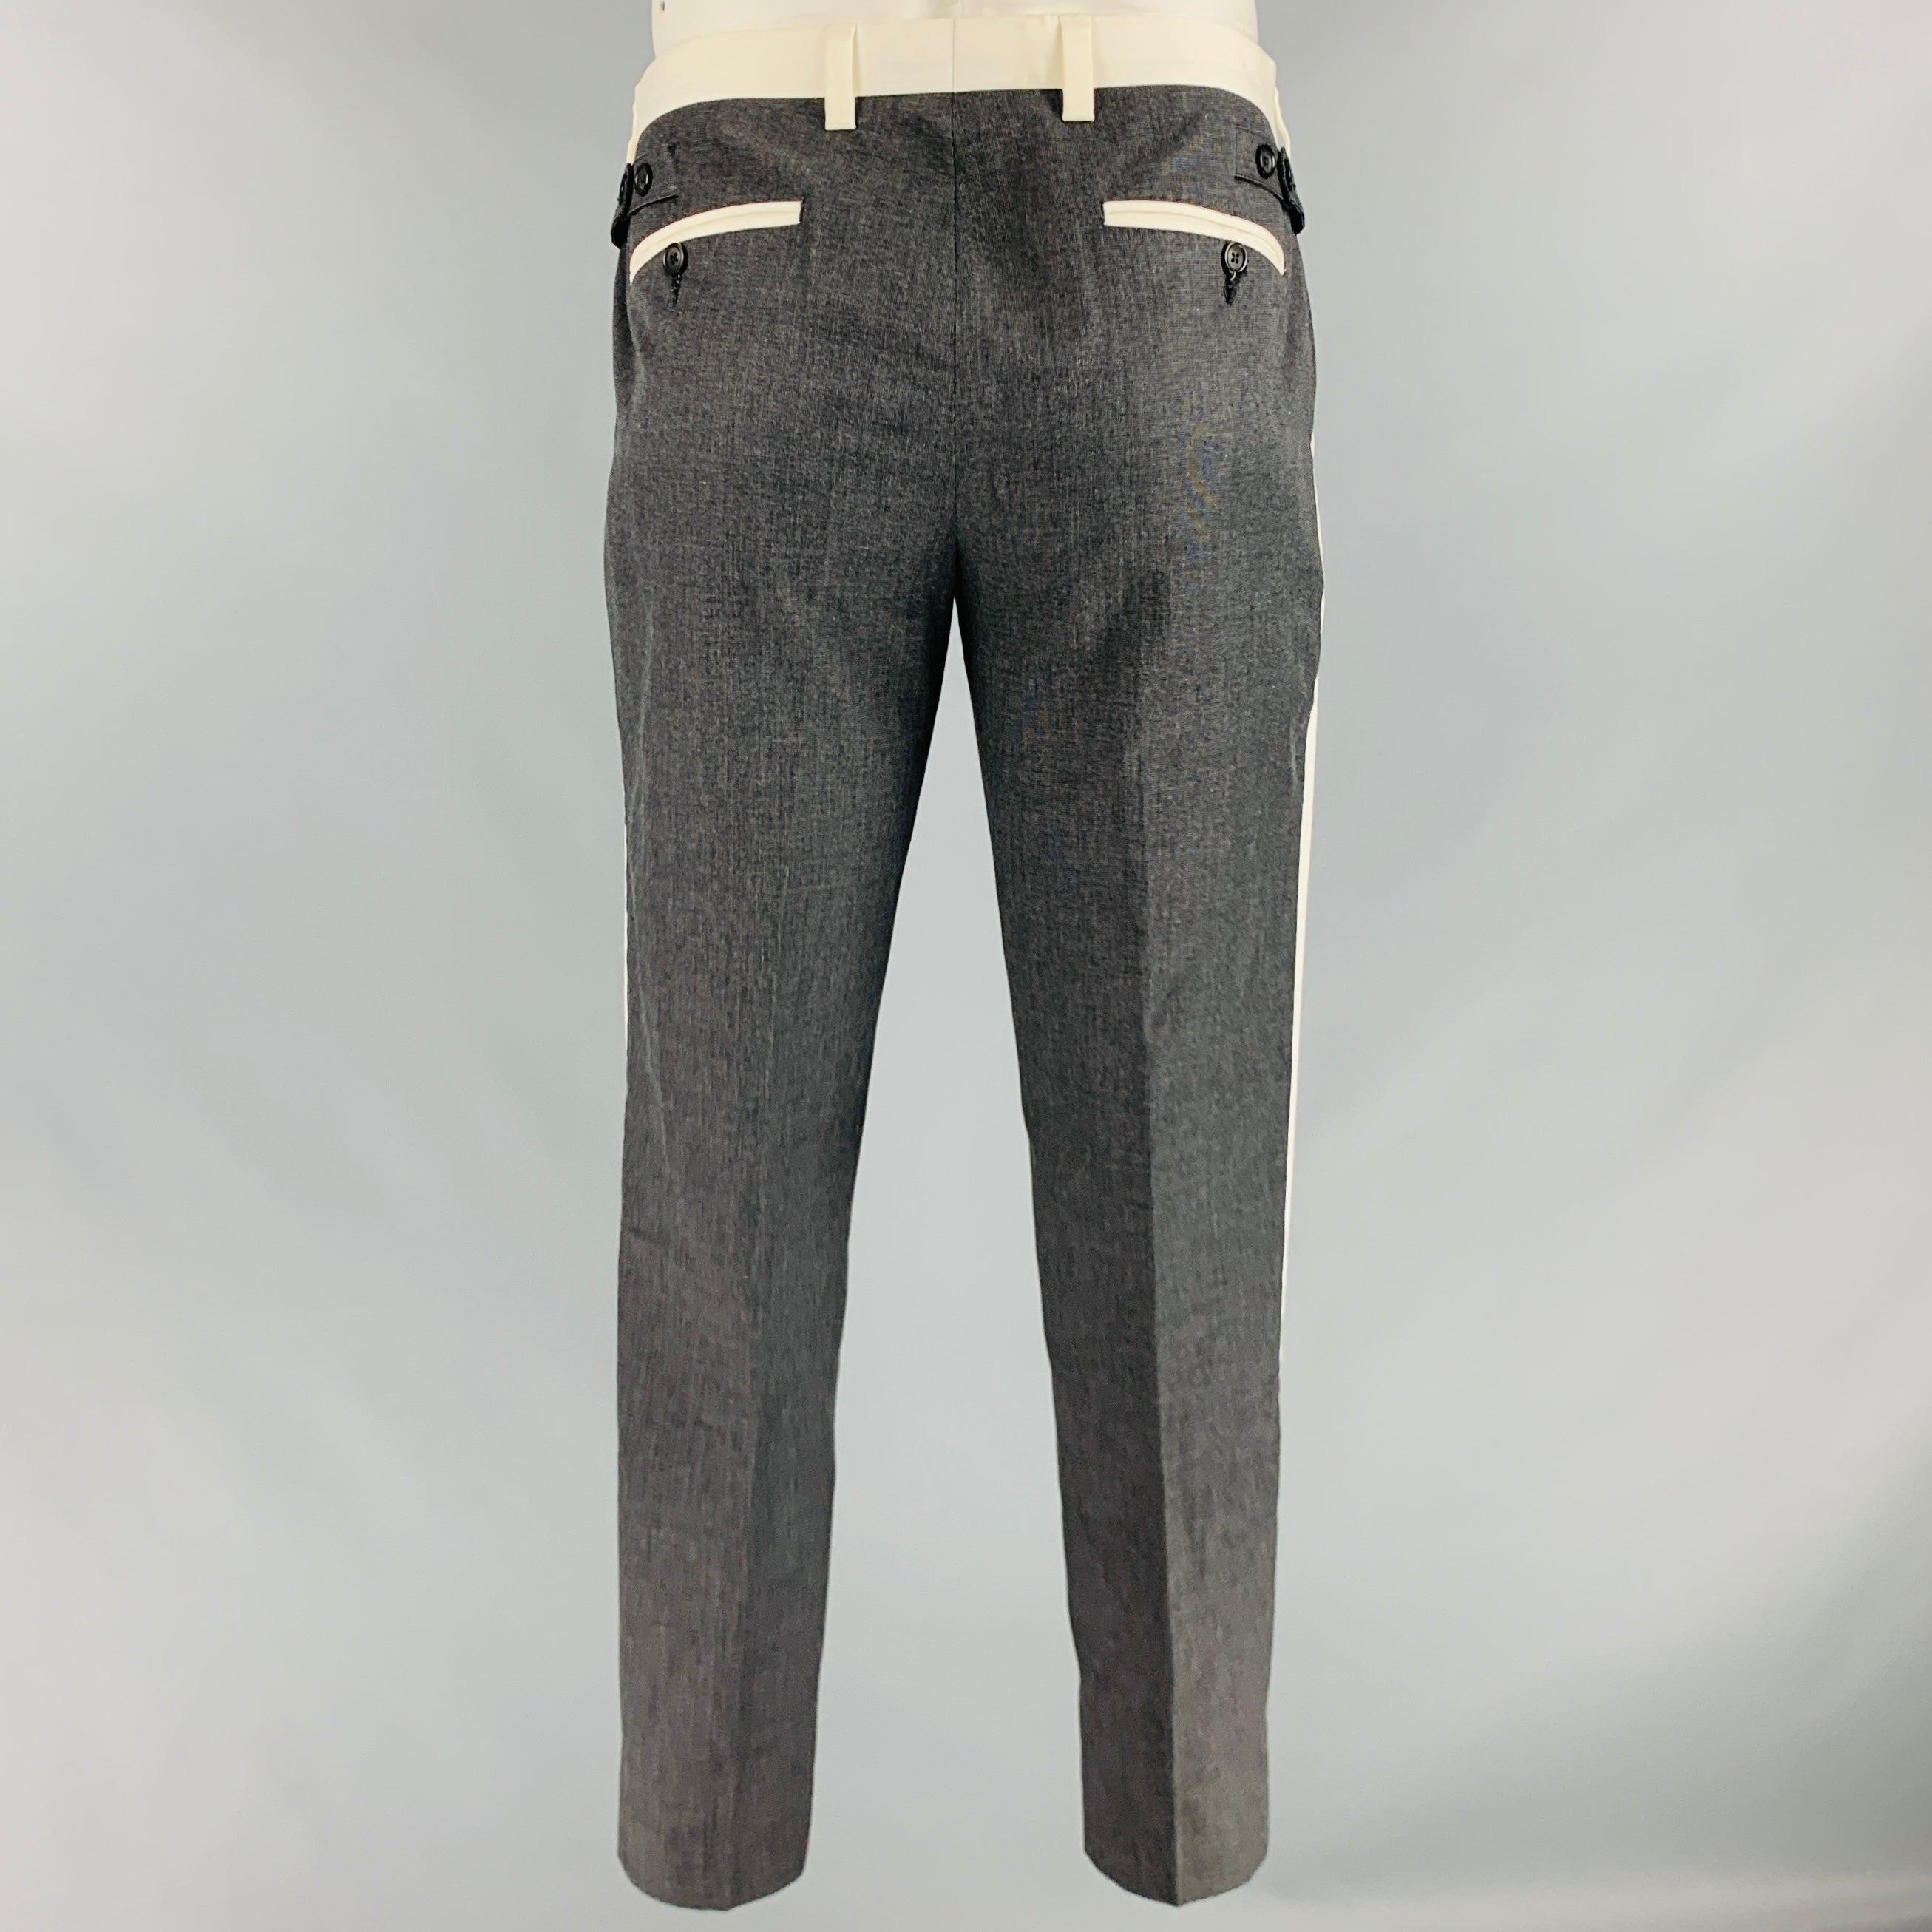 DOLCE & GABBANA tuxedo pants
in a charcoal grey cotton fabric featuring a grid pattern, off white contrast trim, side tabs, and zip fly closure. Made in Italy.Very Good Pre-Owned Condition. Minor marks around waistband and pocket.. 

Marked:   50